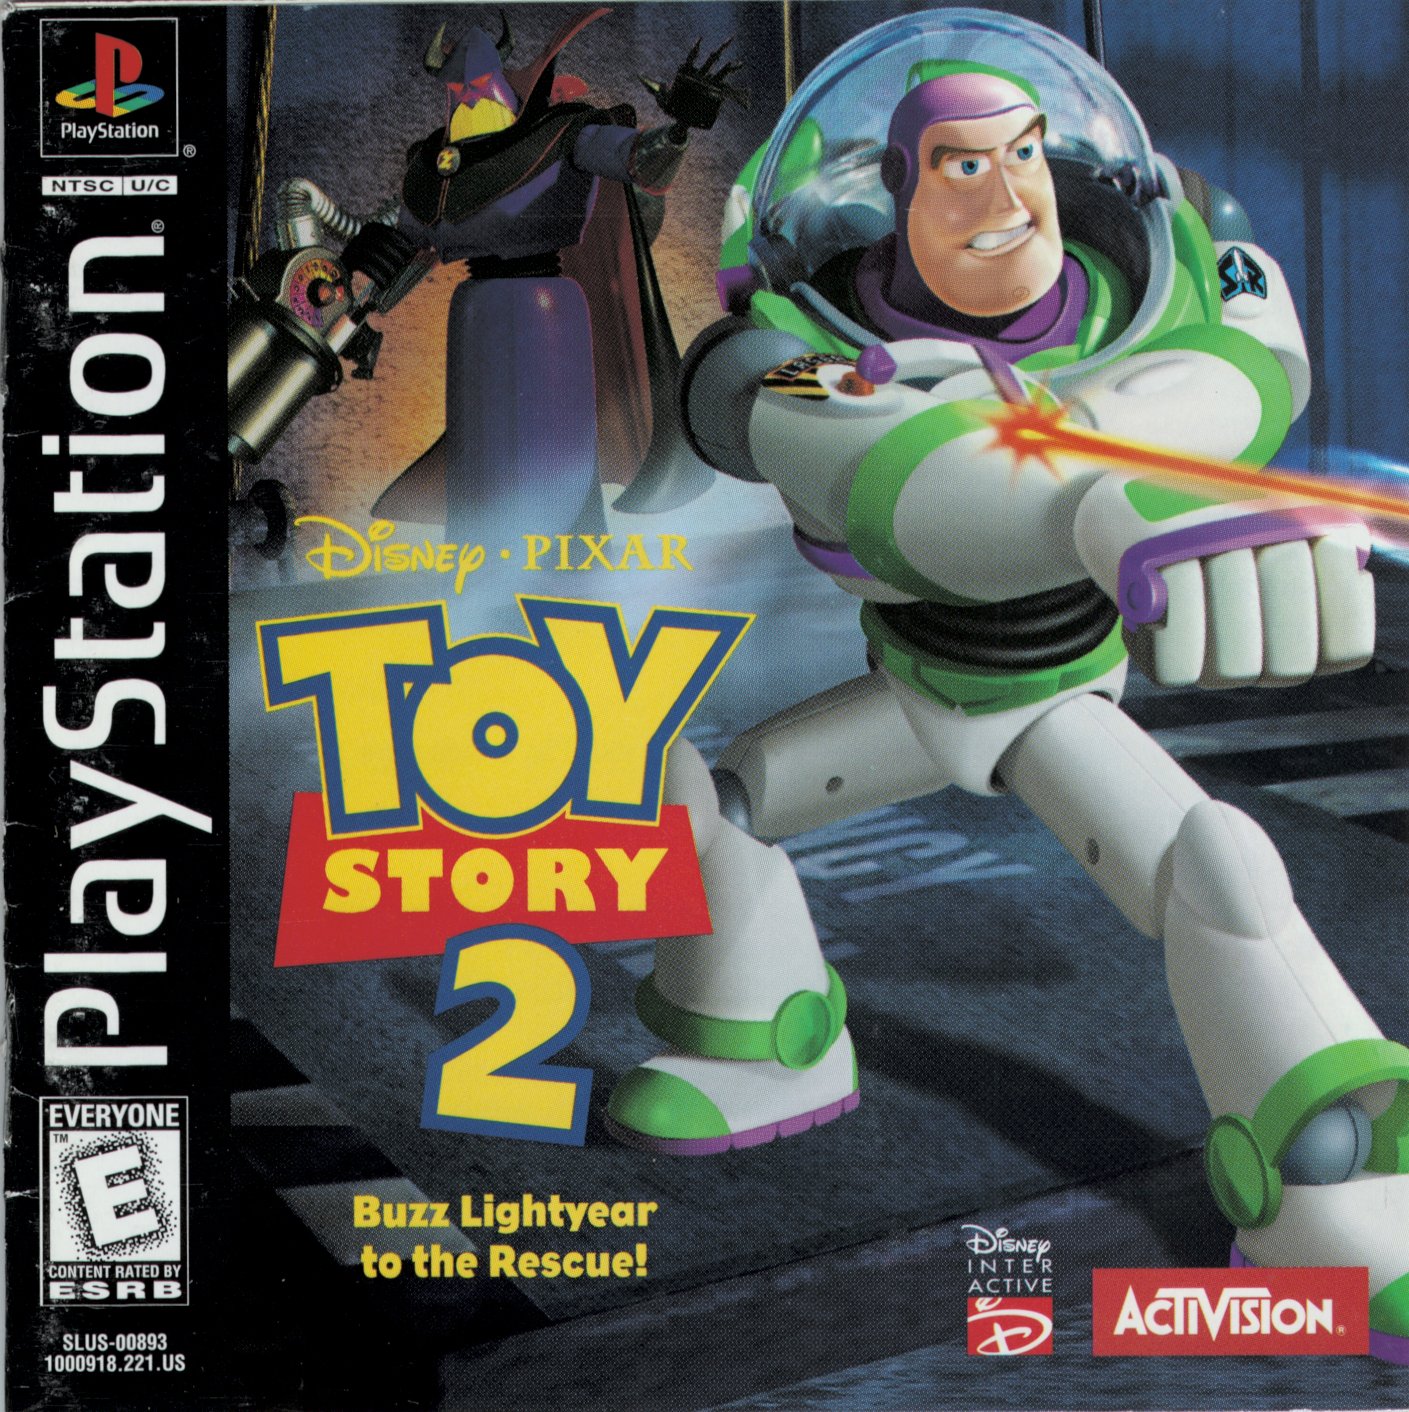 Скачай toy 2. Toy story 2 ps1 Cover. Toy story 2 ps1 обложка. Toy story 2 Buzz Lightyear игра. Toy story 2: Buzz Lightyear to the Rescue обложка.